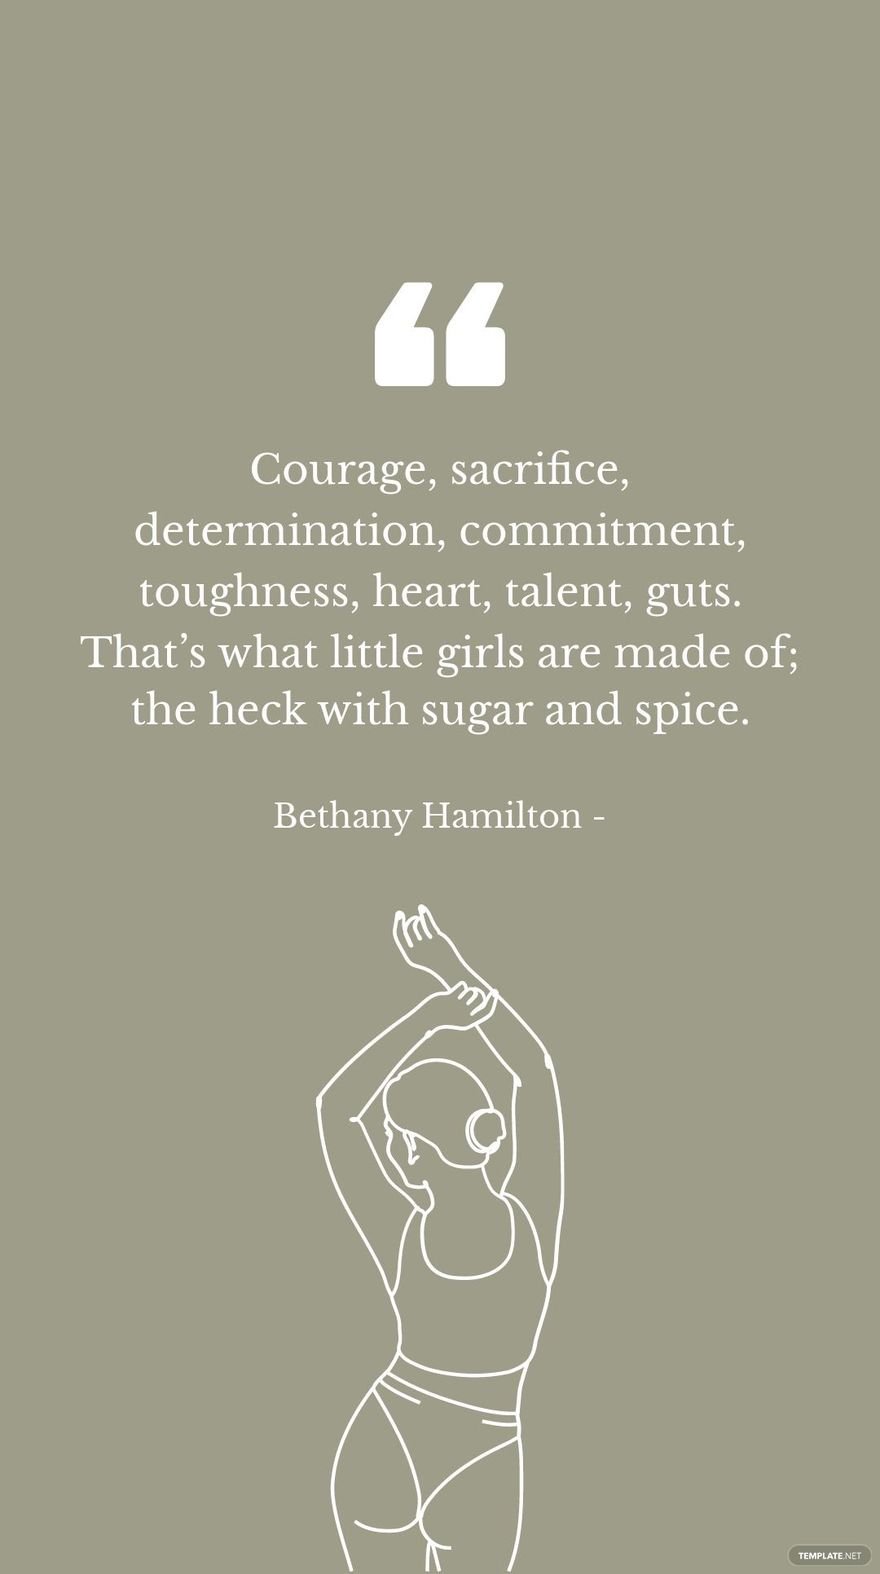 Bethany Hamilton - Courage, sacrifice, determination, commitment, toughness, heart, talent, guts. That’s what little girls are made of; the heck with sugar and spice.